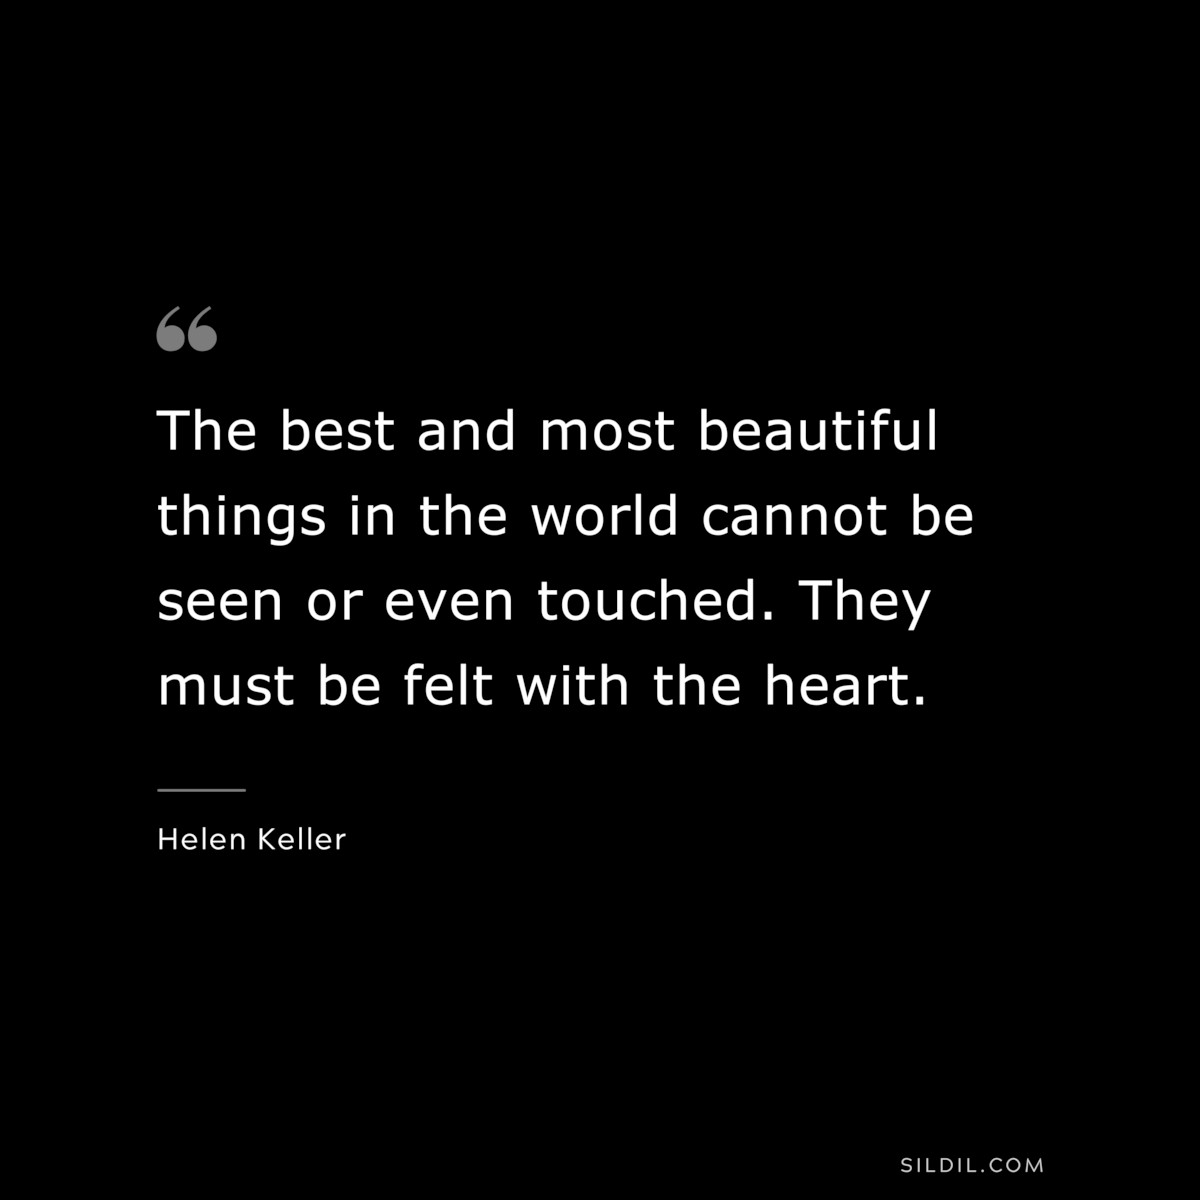 The best and most beautiful things in the world cannot be seen or even touched. They must be felt with the heart. ― Helen Keller